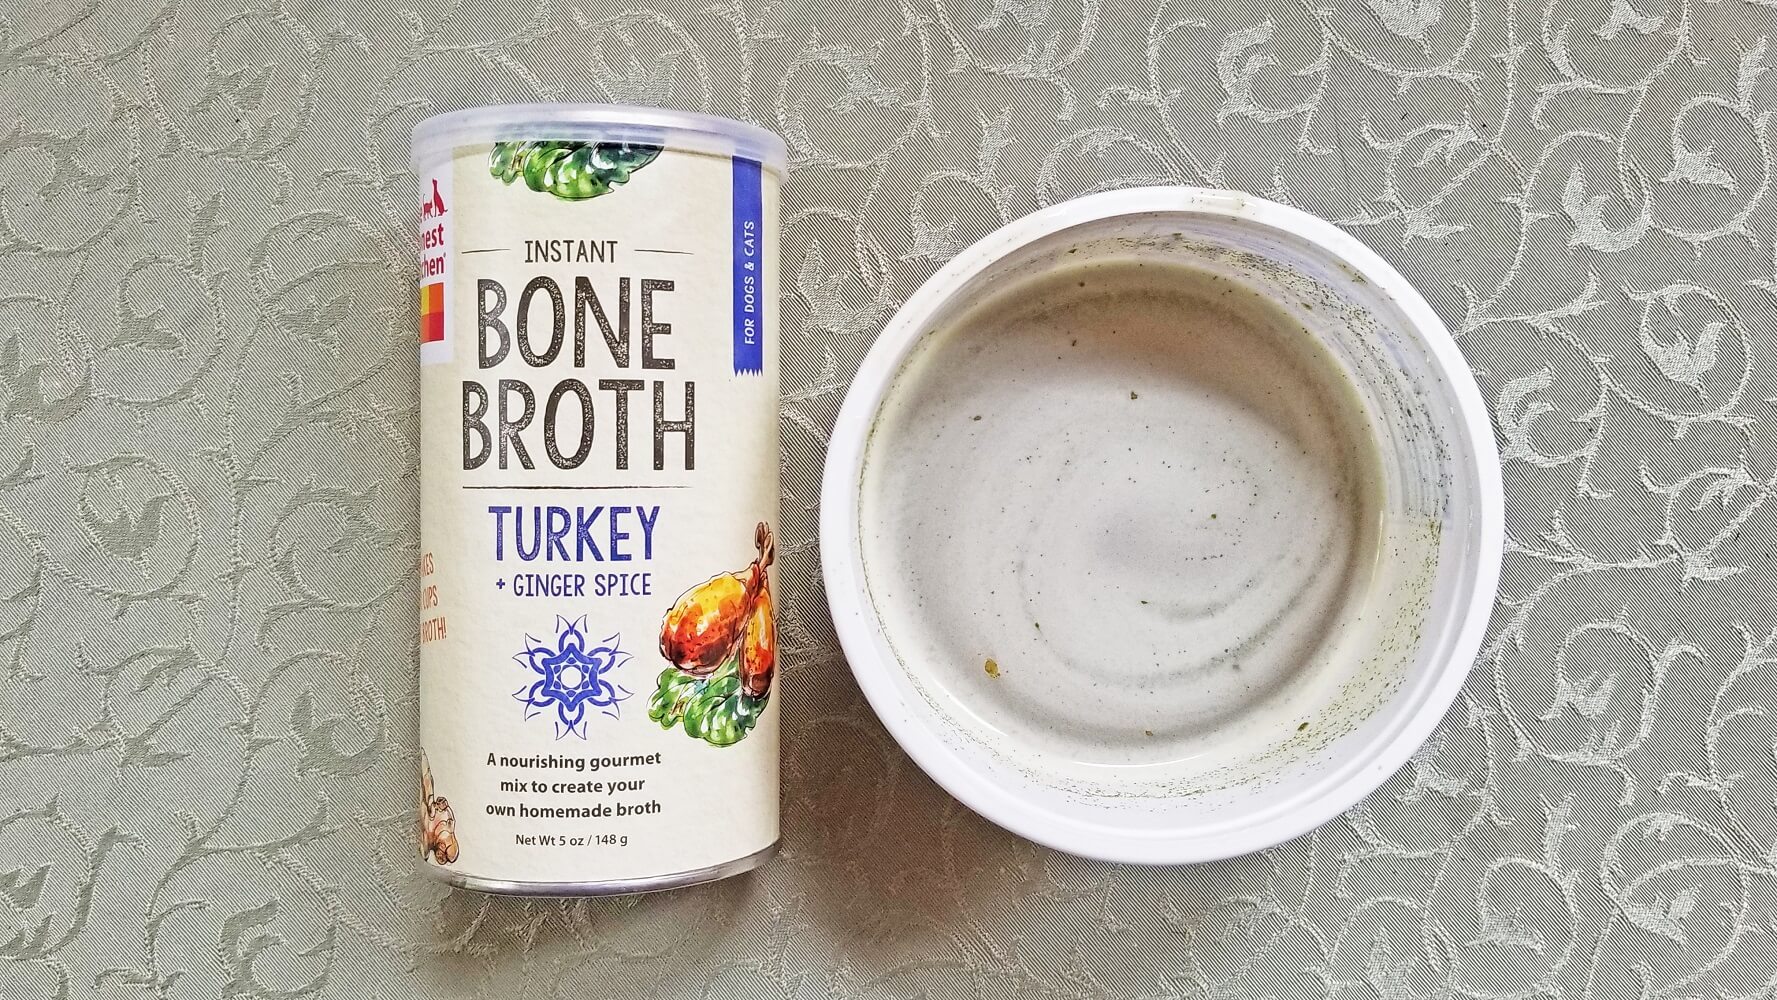 The Honest Kitchen Bone Broth Review: We Tried Bone Broth for Cats